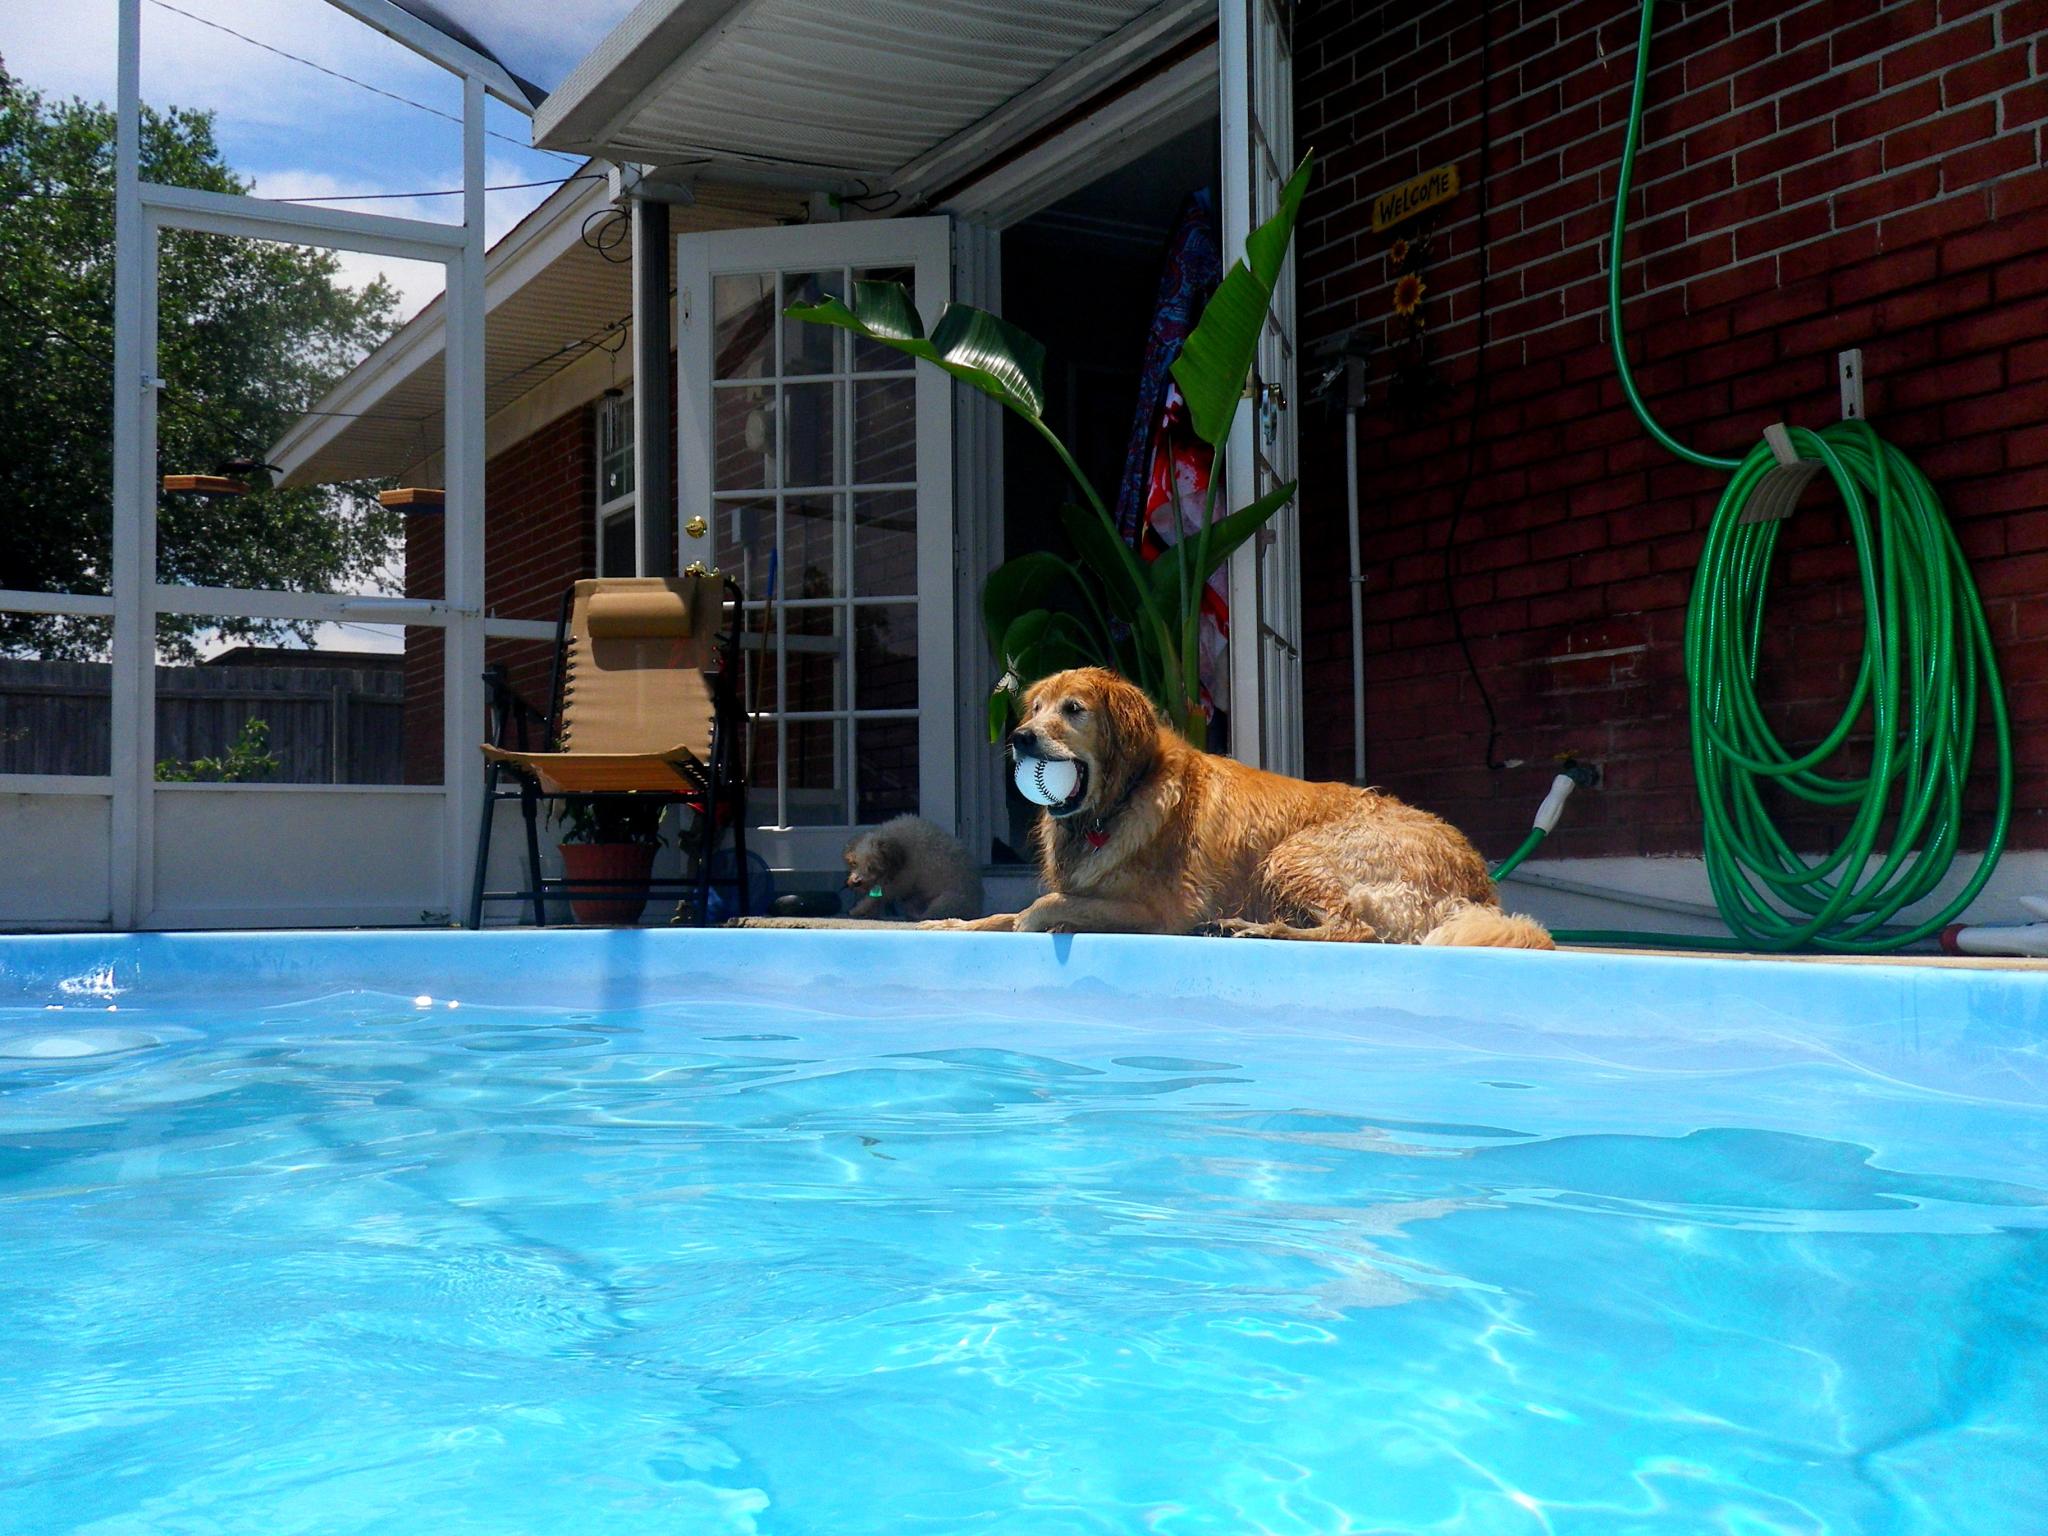 a dog is sitting in the pool with his head in it